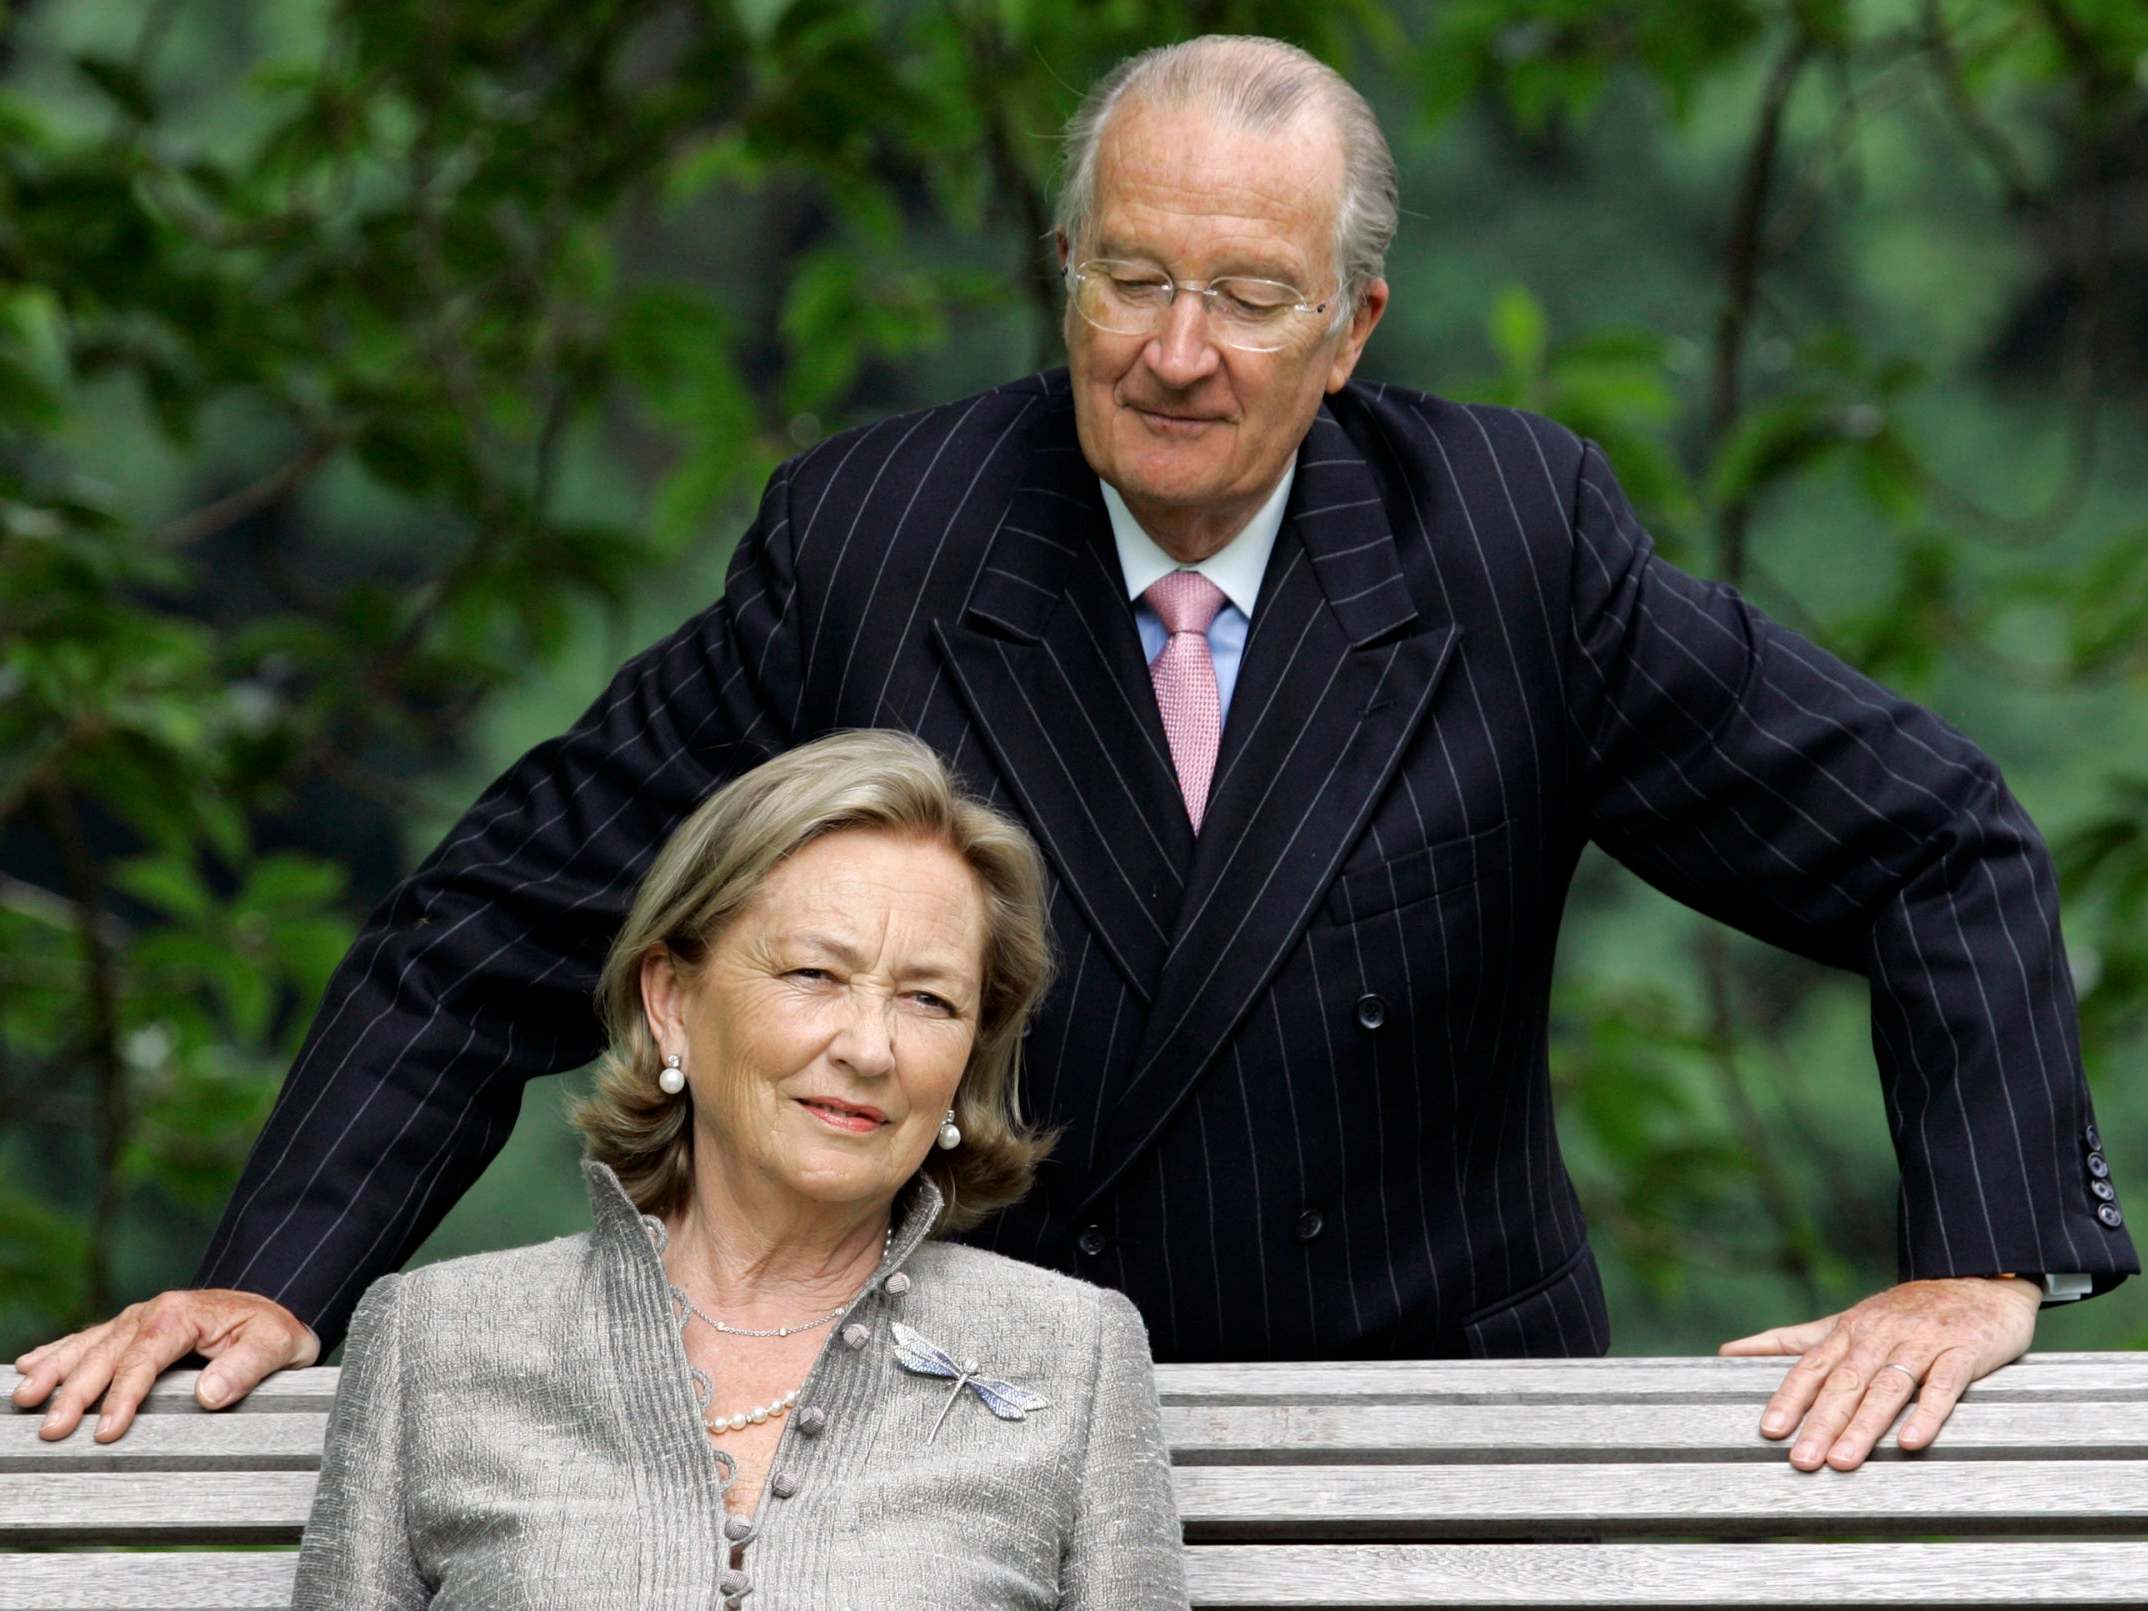 Belgium's Queen Paola and King Albert II at the Royal Palace in Laeken, Belgium, in July 2008.